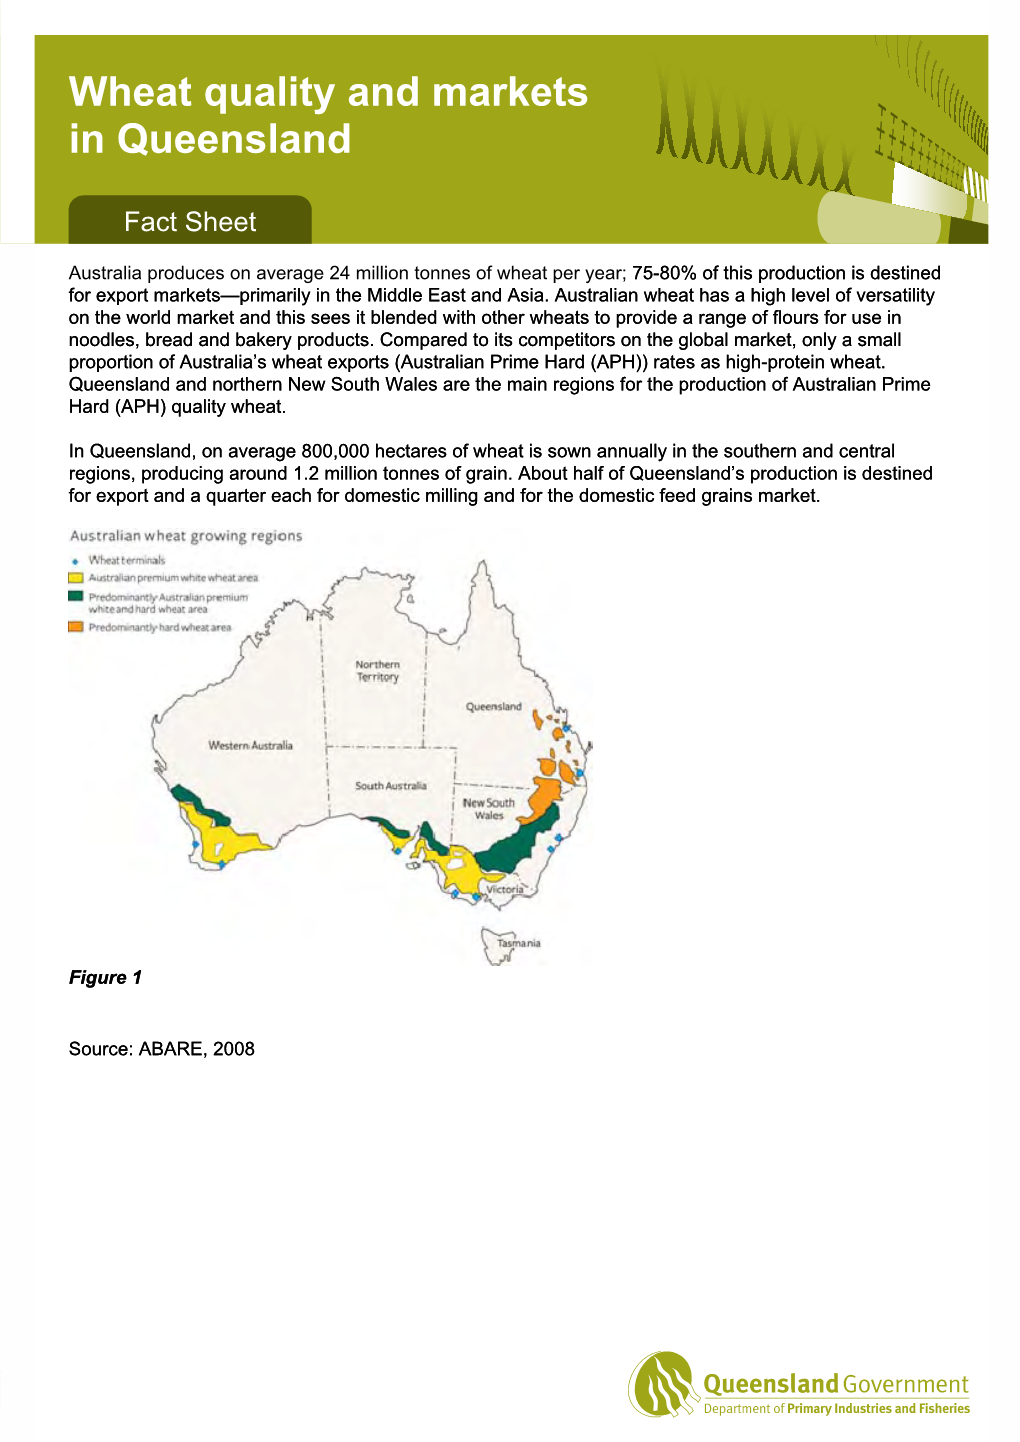 Wheat Quality and Markets in Queensland